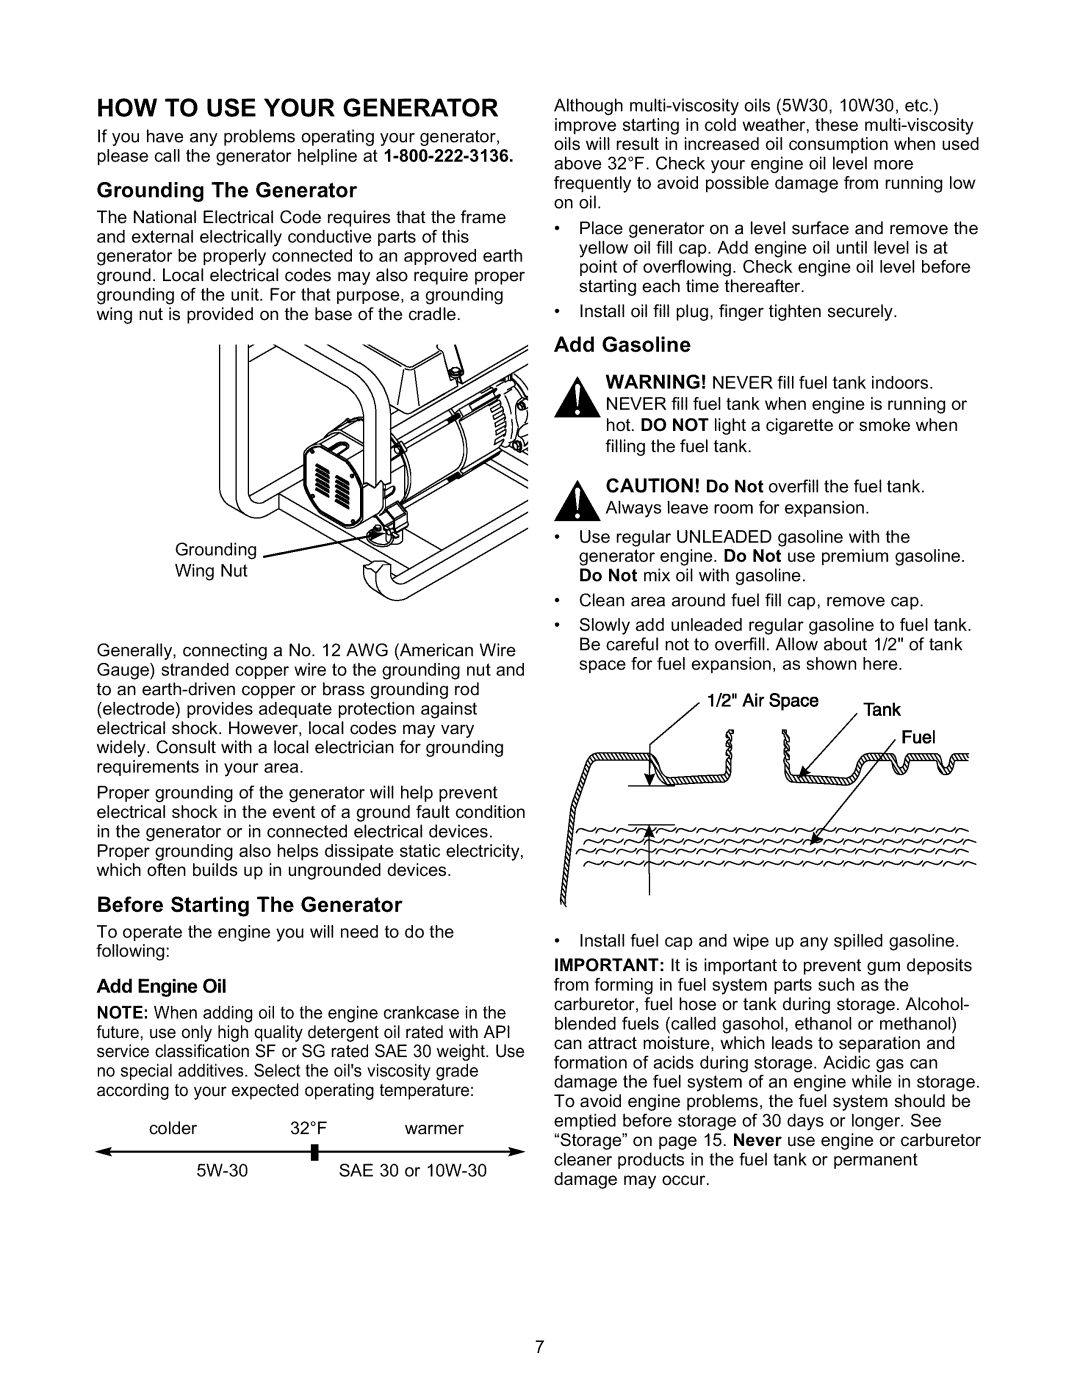 Craftsman 580.327141 How To Use Your Generator, Grounding The Generator, Add Gasoline, Before Starting The Generator 